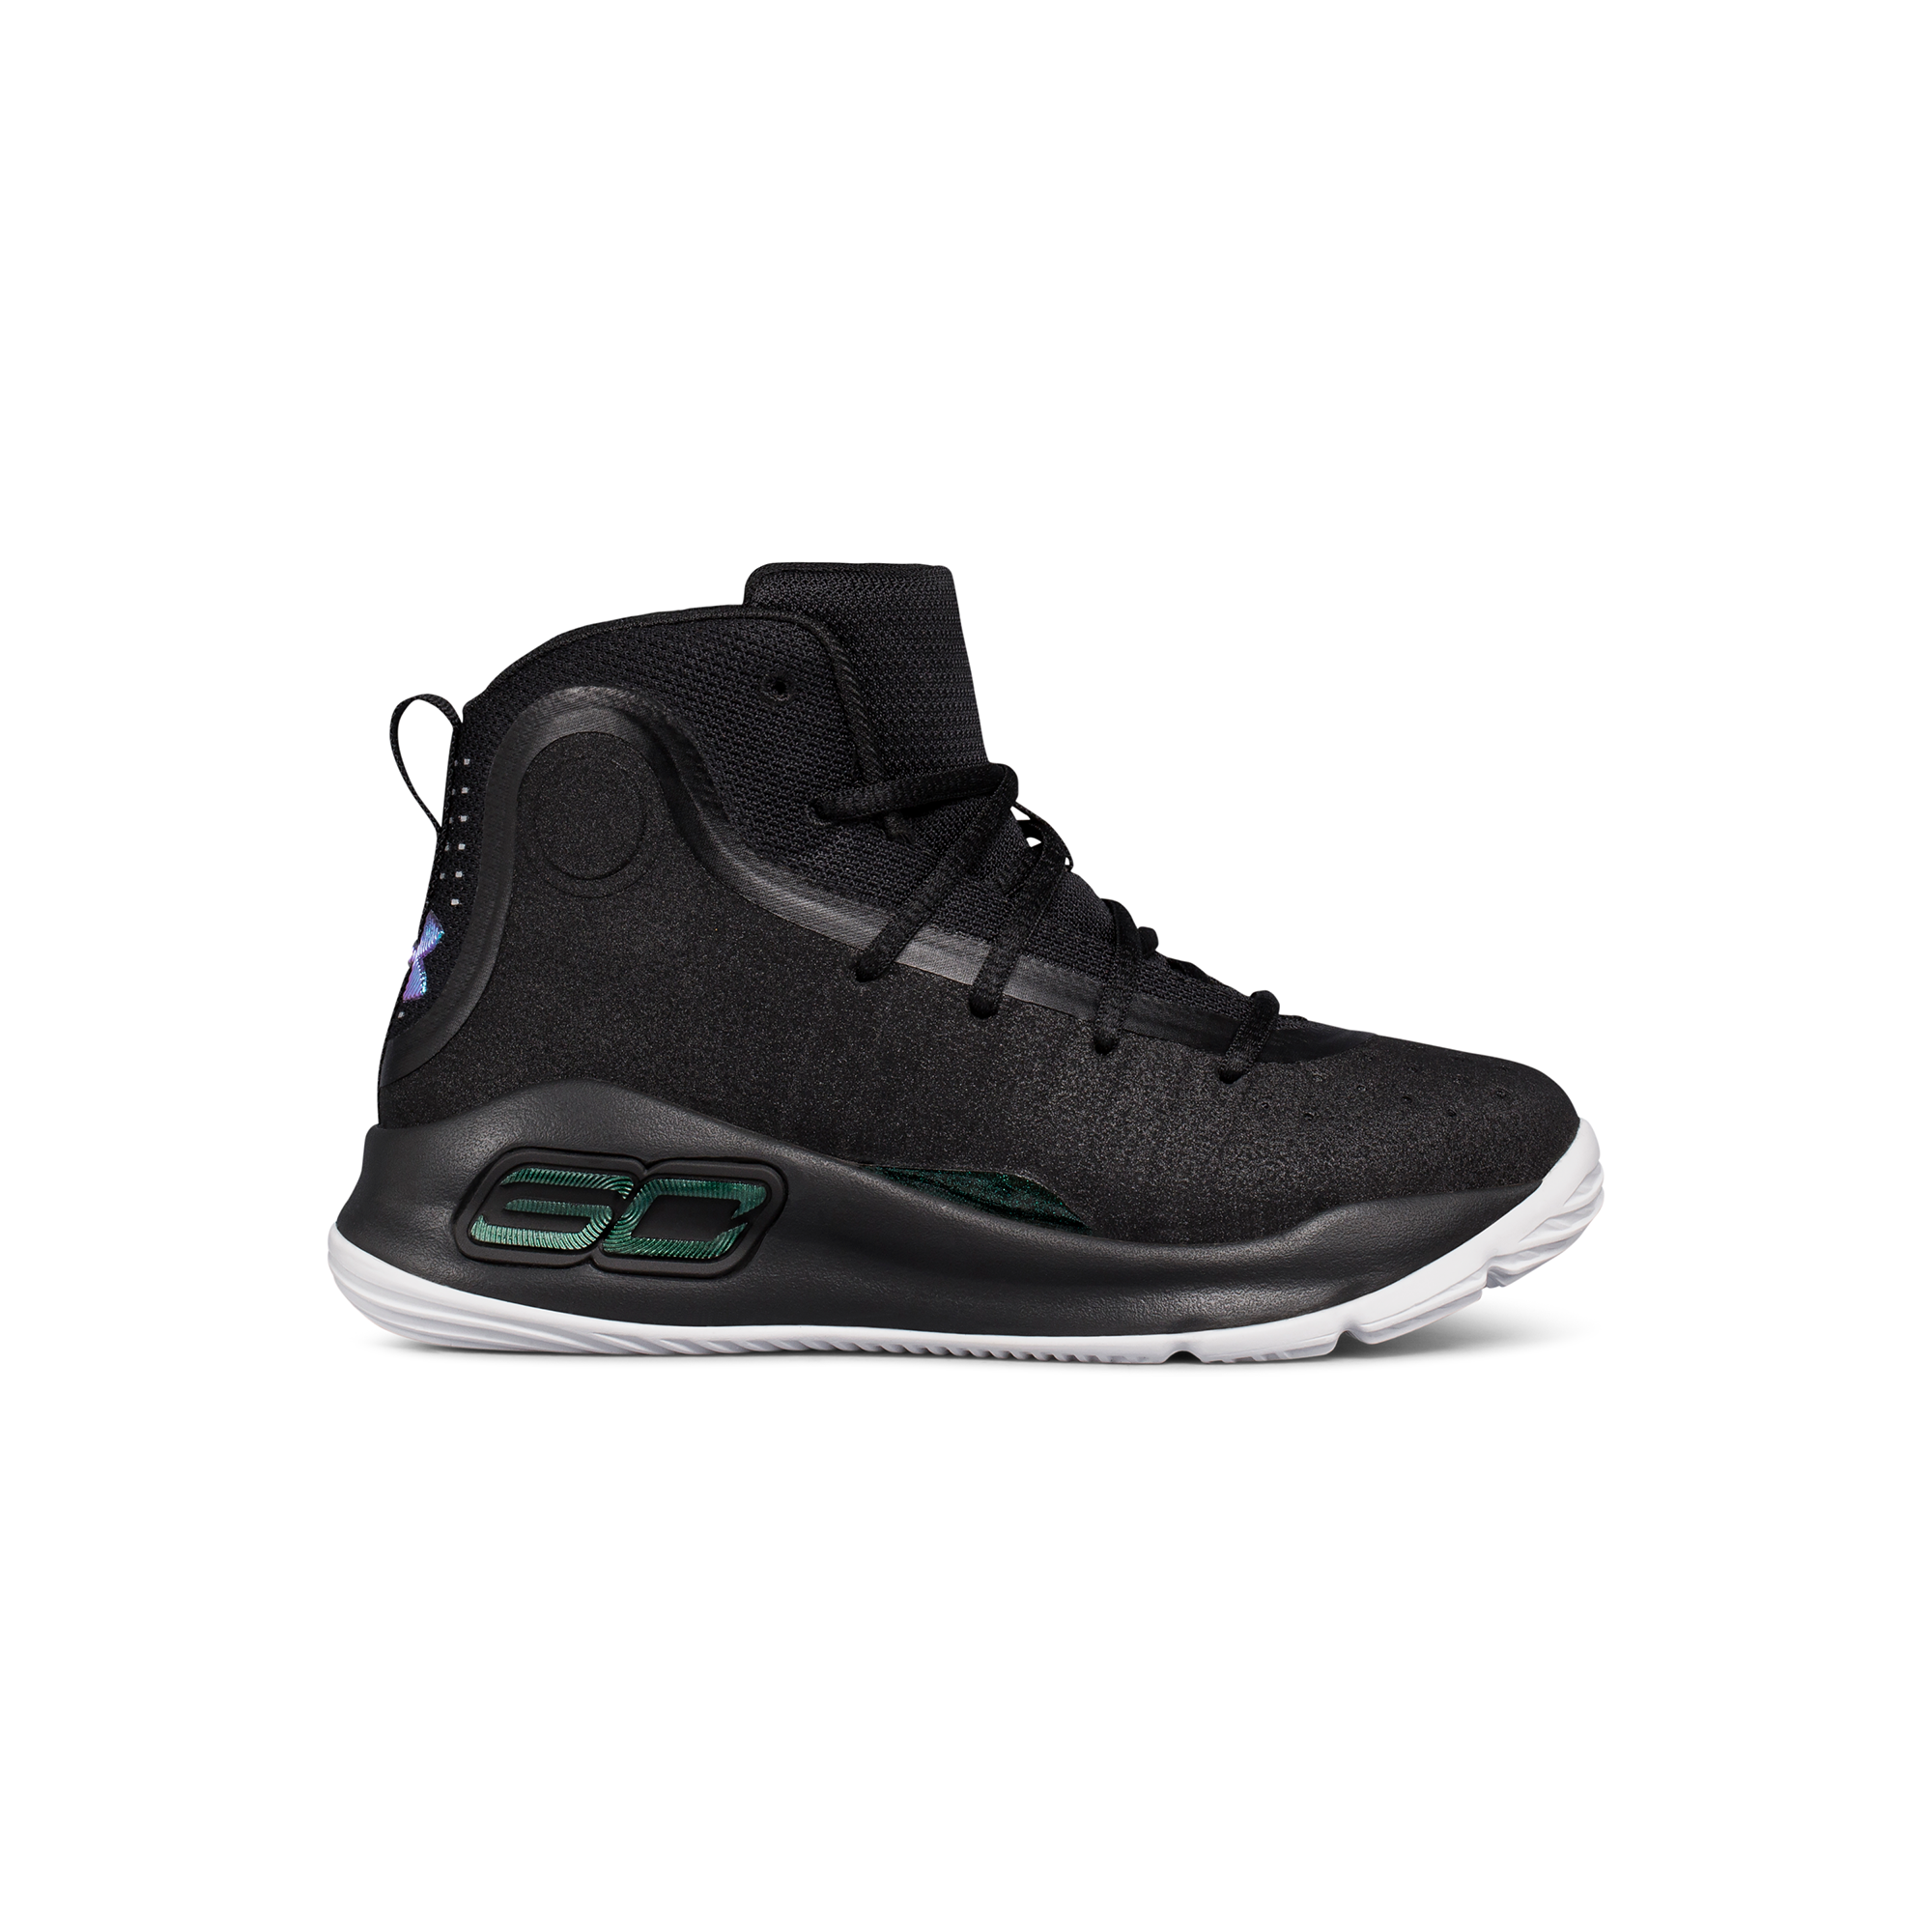 stephen curry shoes size 8